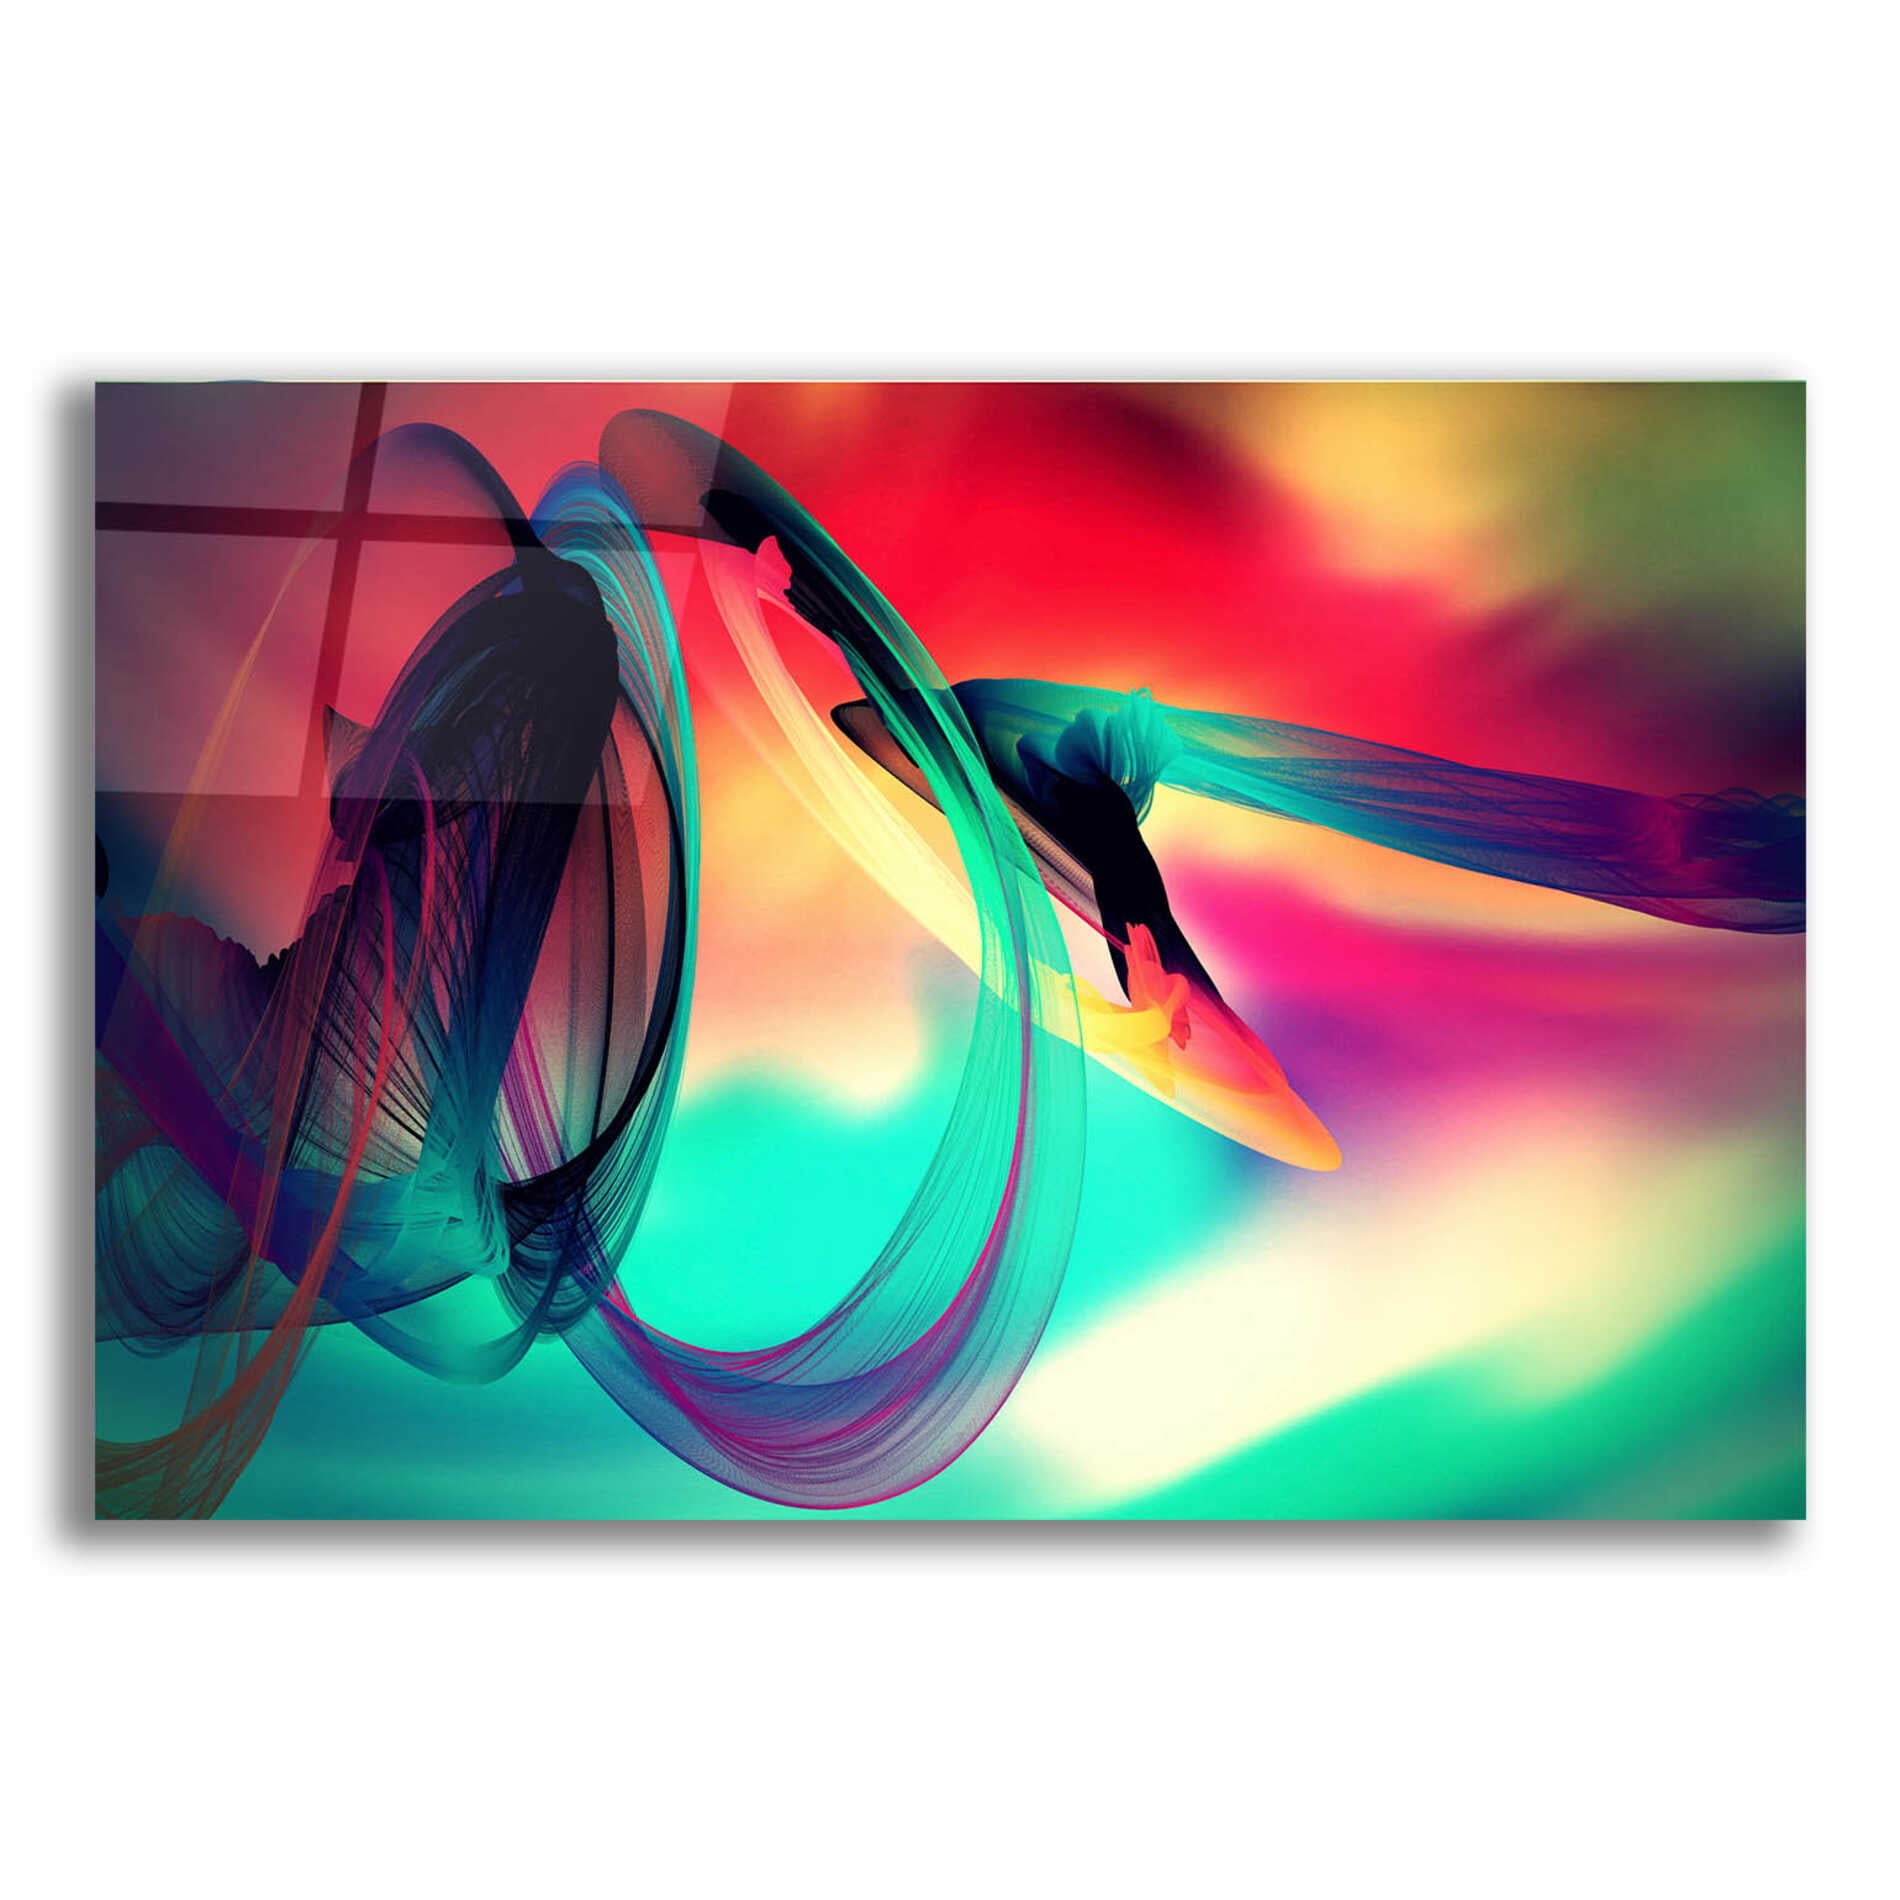 Epic Art 'Color In The Lines 27' by Irena Orlov, Acrylic Glass Wall Art,16x12